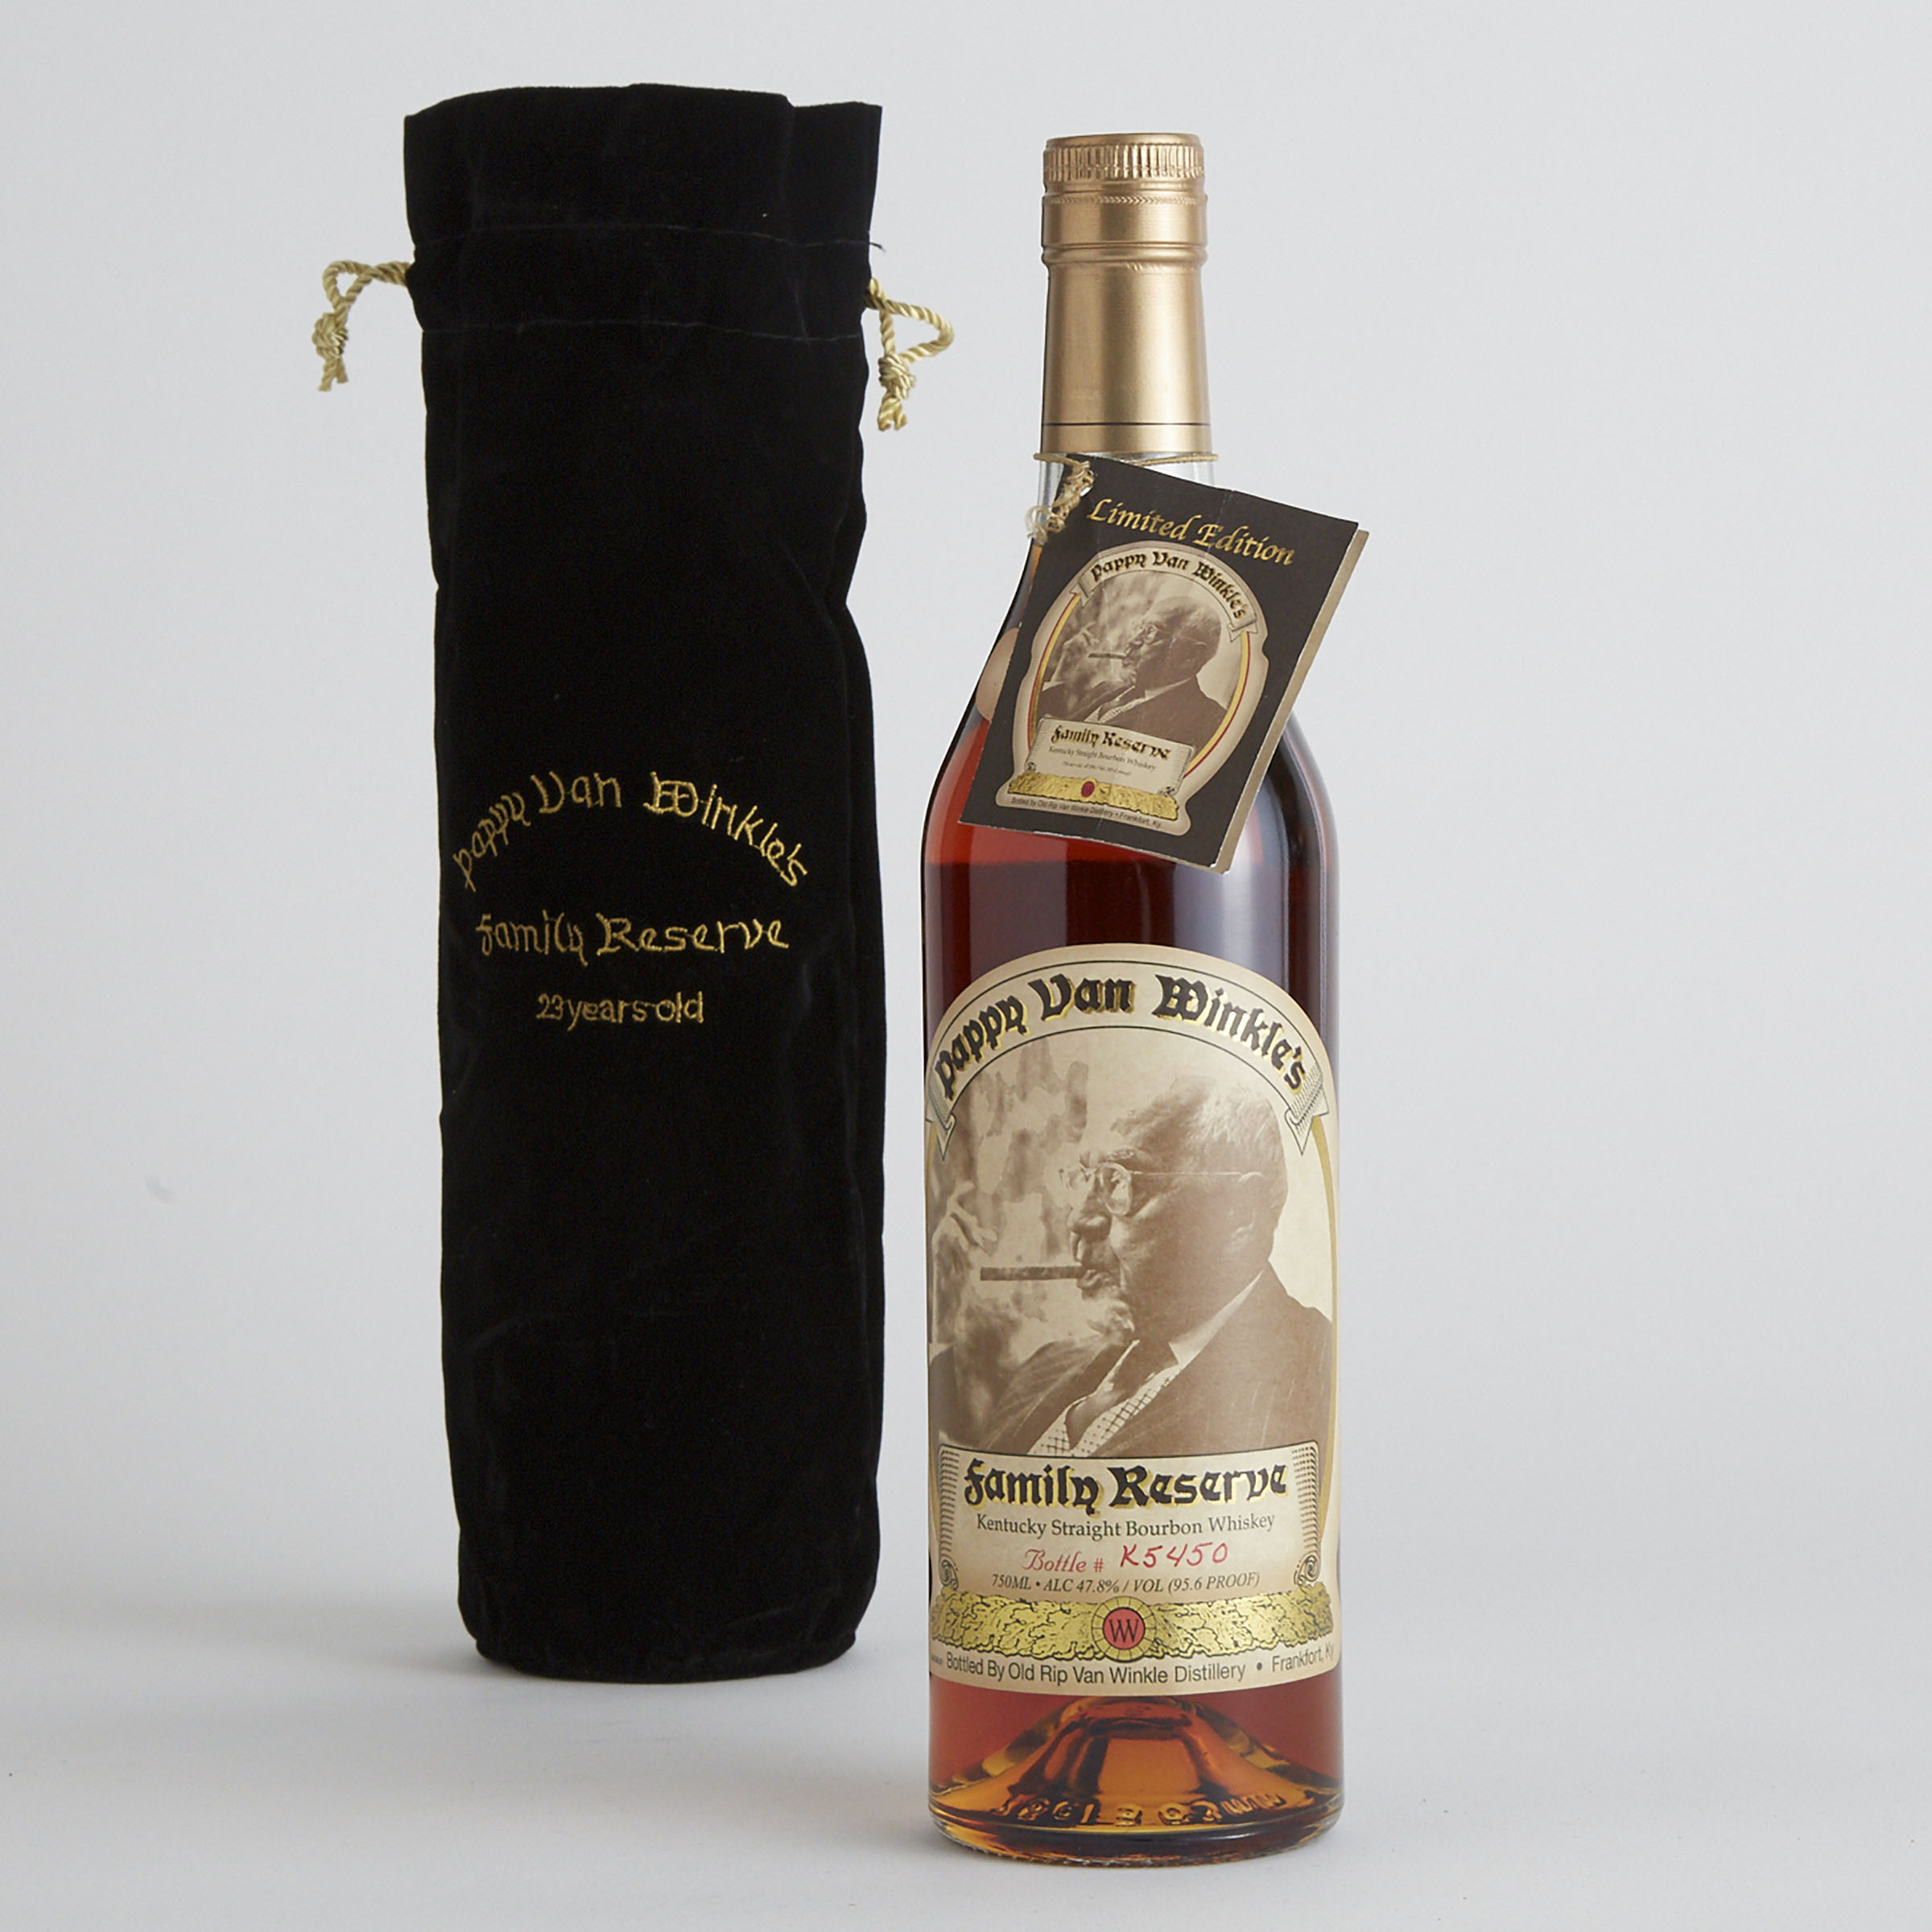 PAPPY VAN WINKLE FAMILY RESERVE KENTUCKY STRAIGHT BOURBON WHISKEY 23 YEARS (ONE 750 ML)